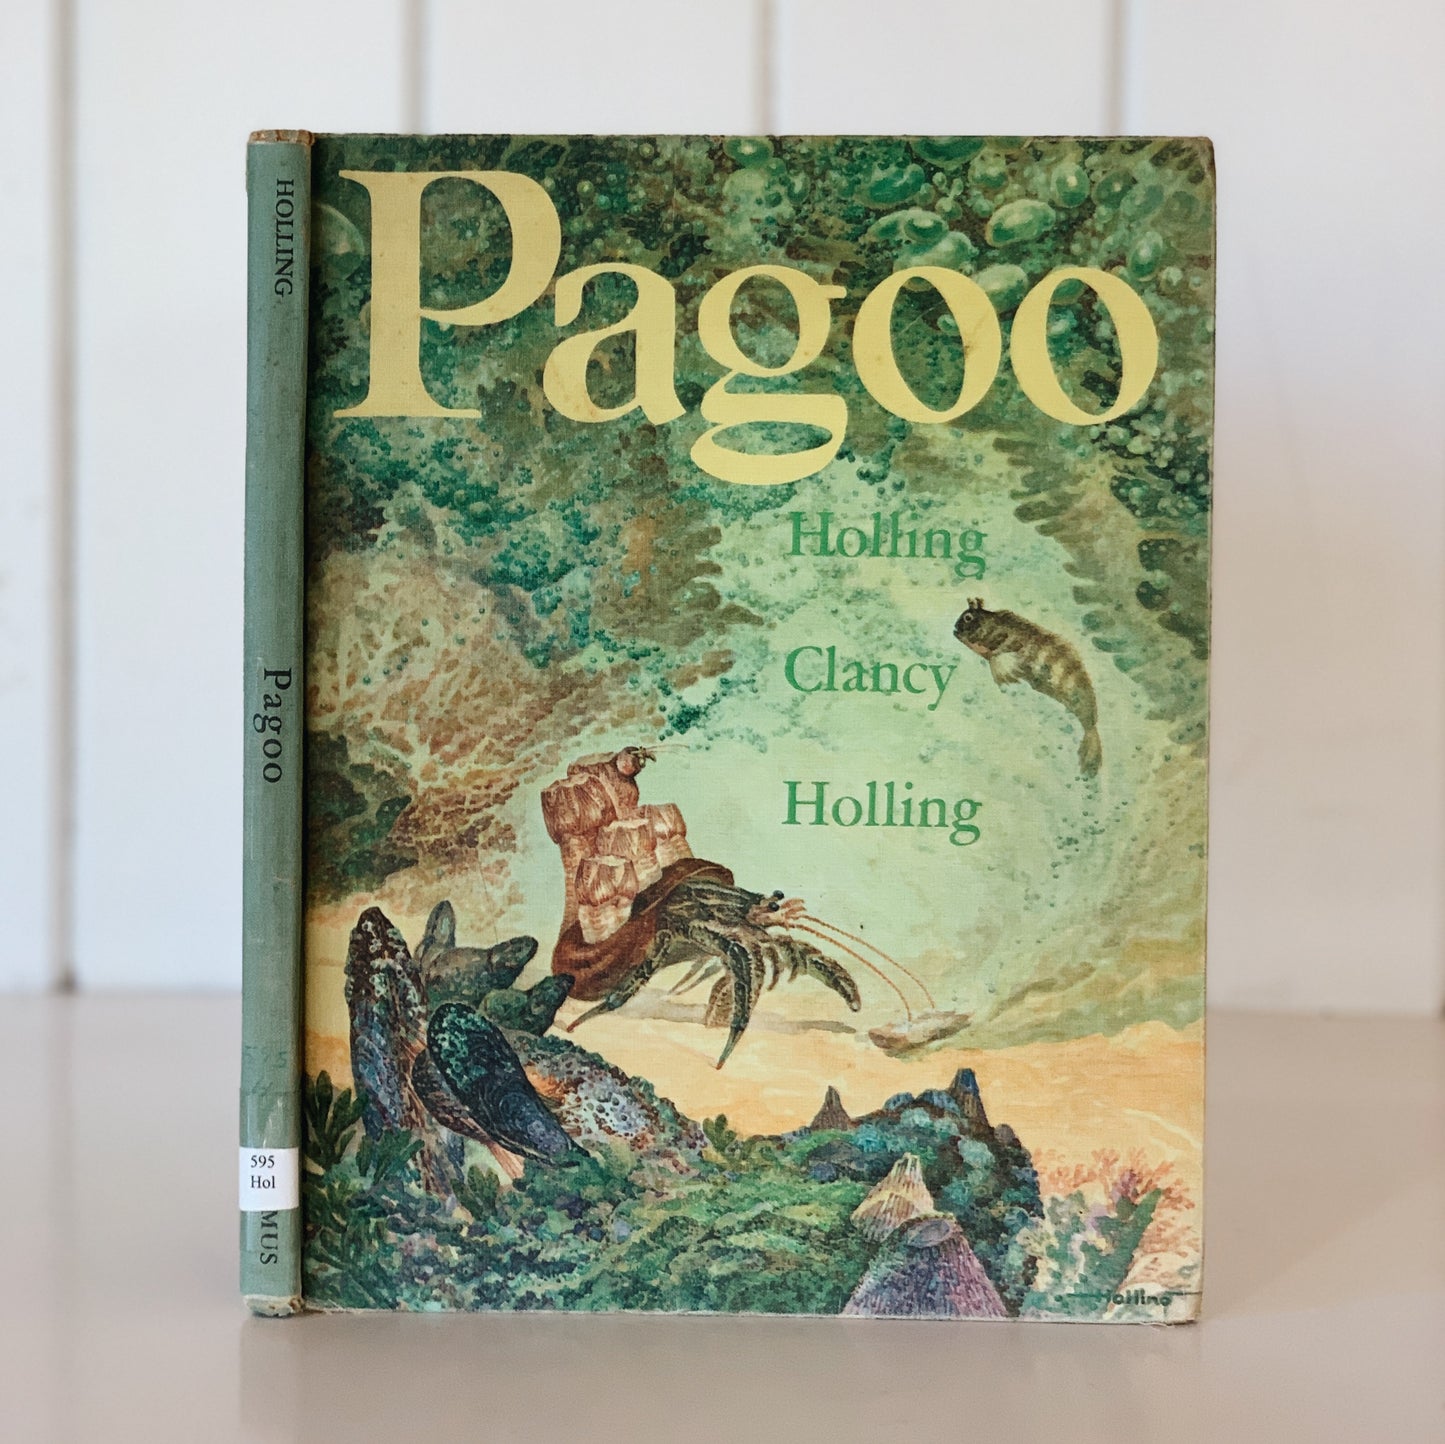 Pagoo, Holling Clancy Holling, 1962, Hermit Crab Life Cycle Book